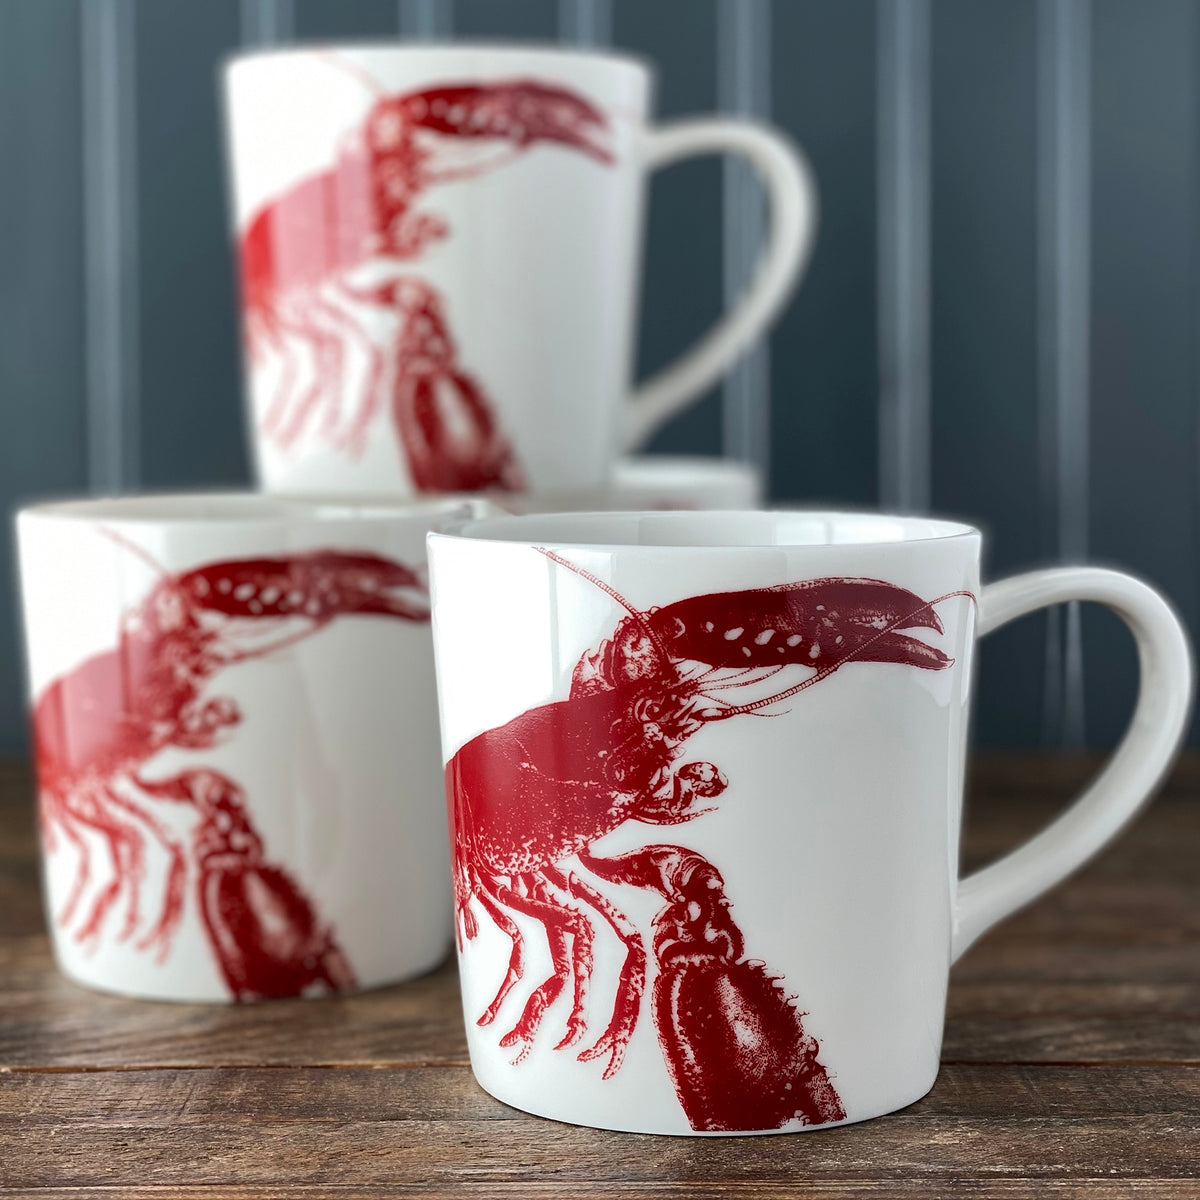 Three white ceramic &quot;Father&#39;s Day Bundle&quot; mugs with red designs from Caskata are stacked on a wooden surface against a dark vertical striped background.